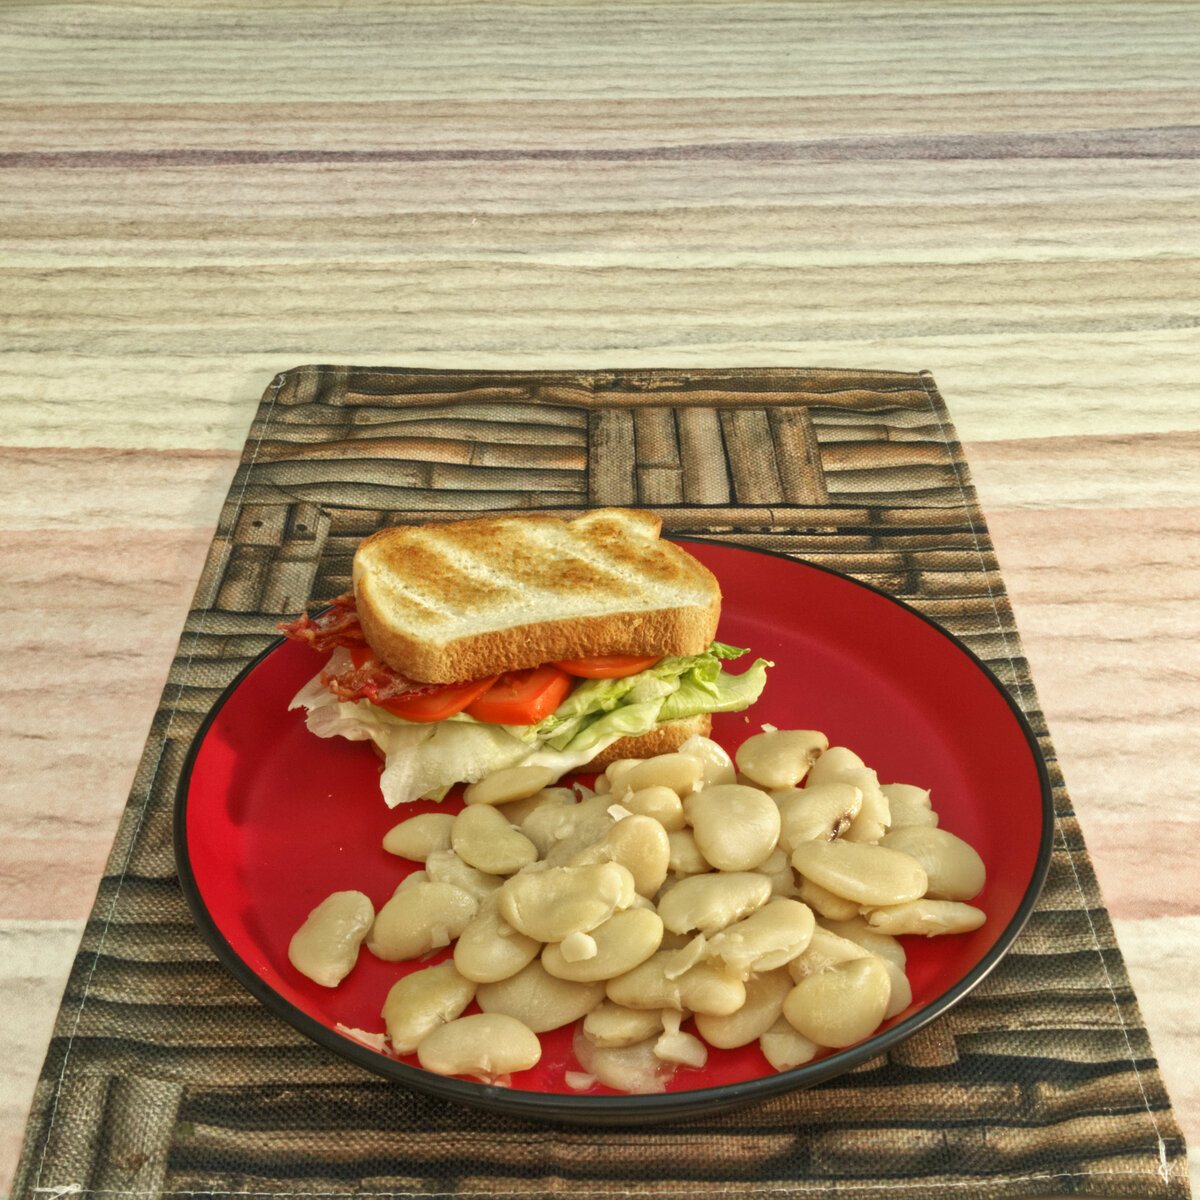 Bacon, Lettuce and Tomato Sandwich with Large Lima Beans